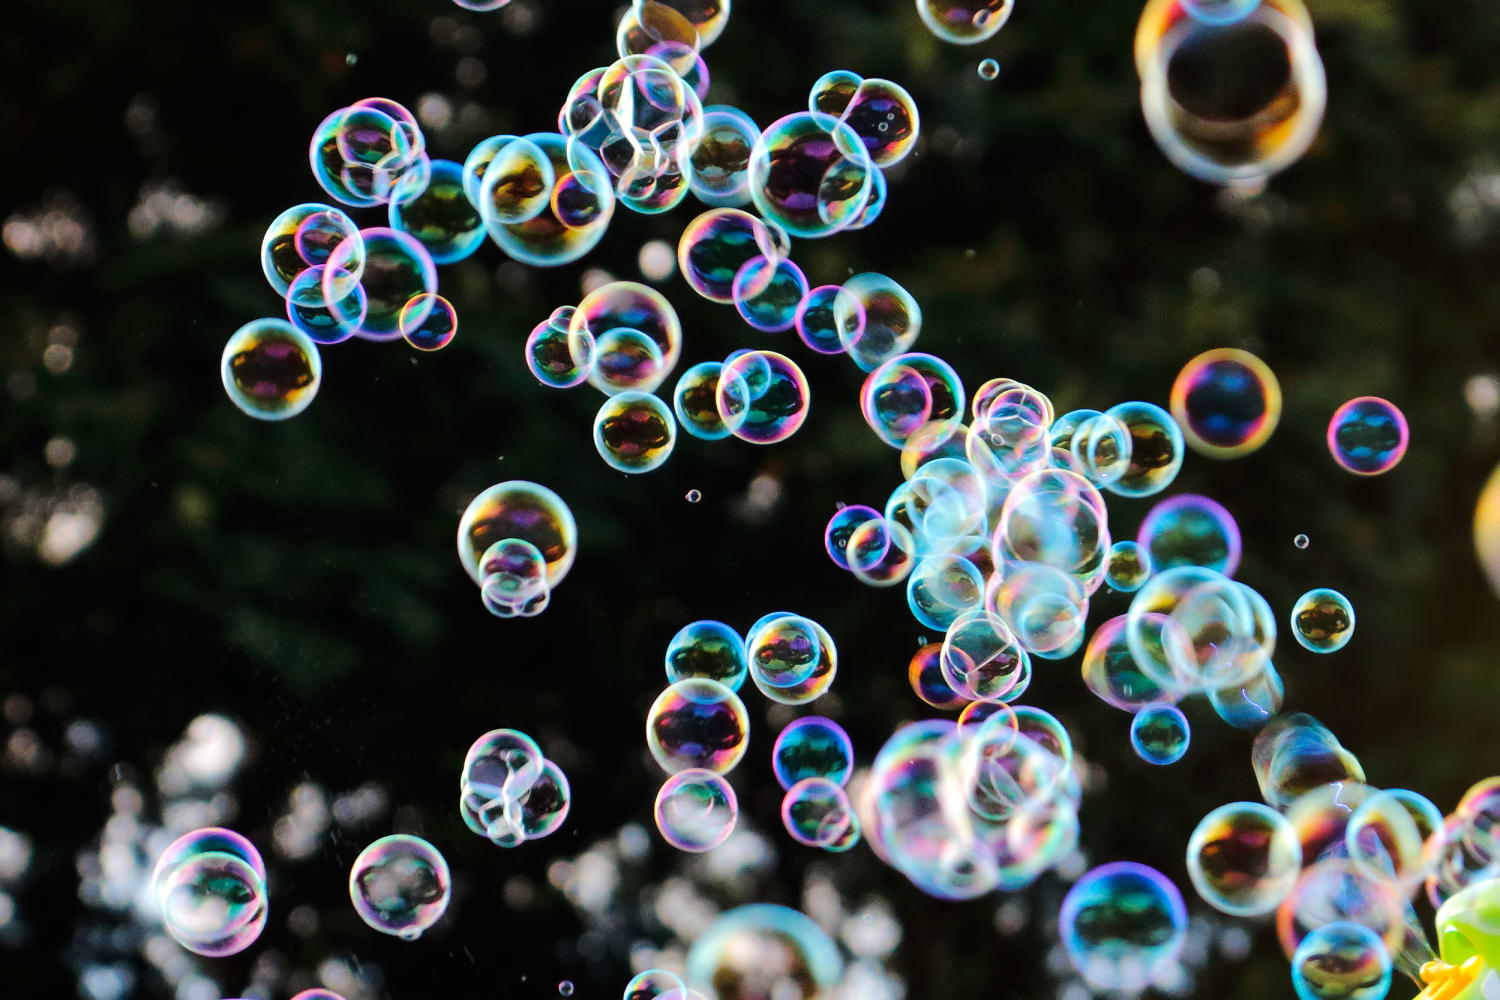 French physicists developed a bubble that didn't burst for more